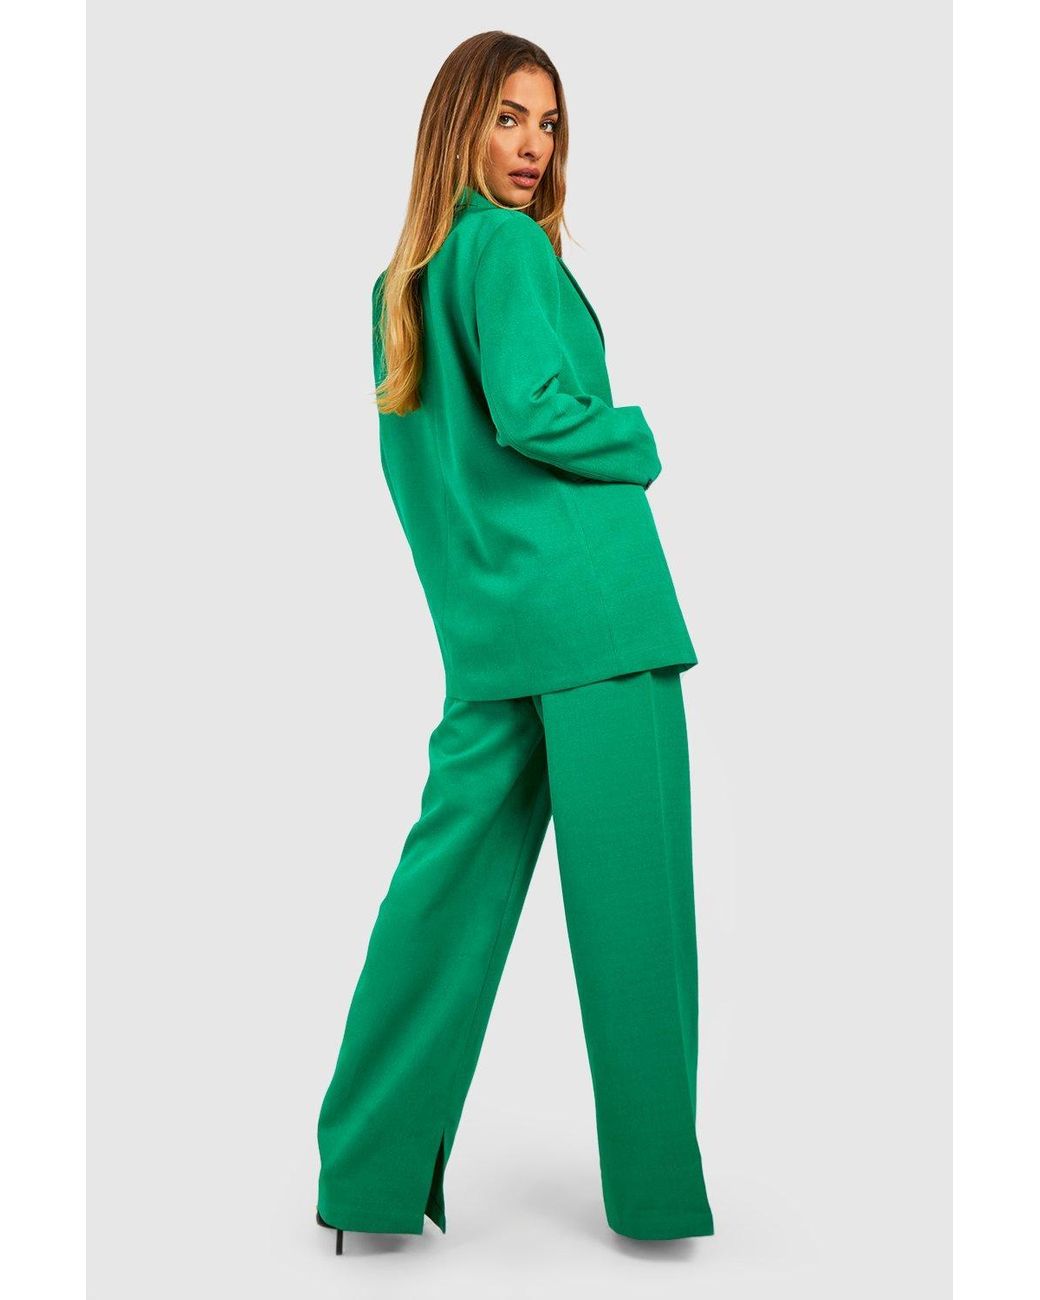 Boohoo Textured Wide Leg Tailored Trousers in Green